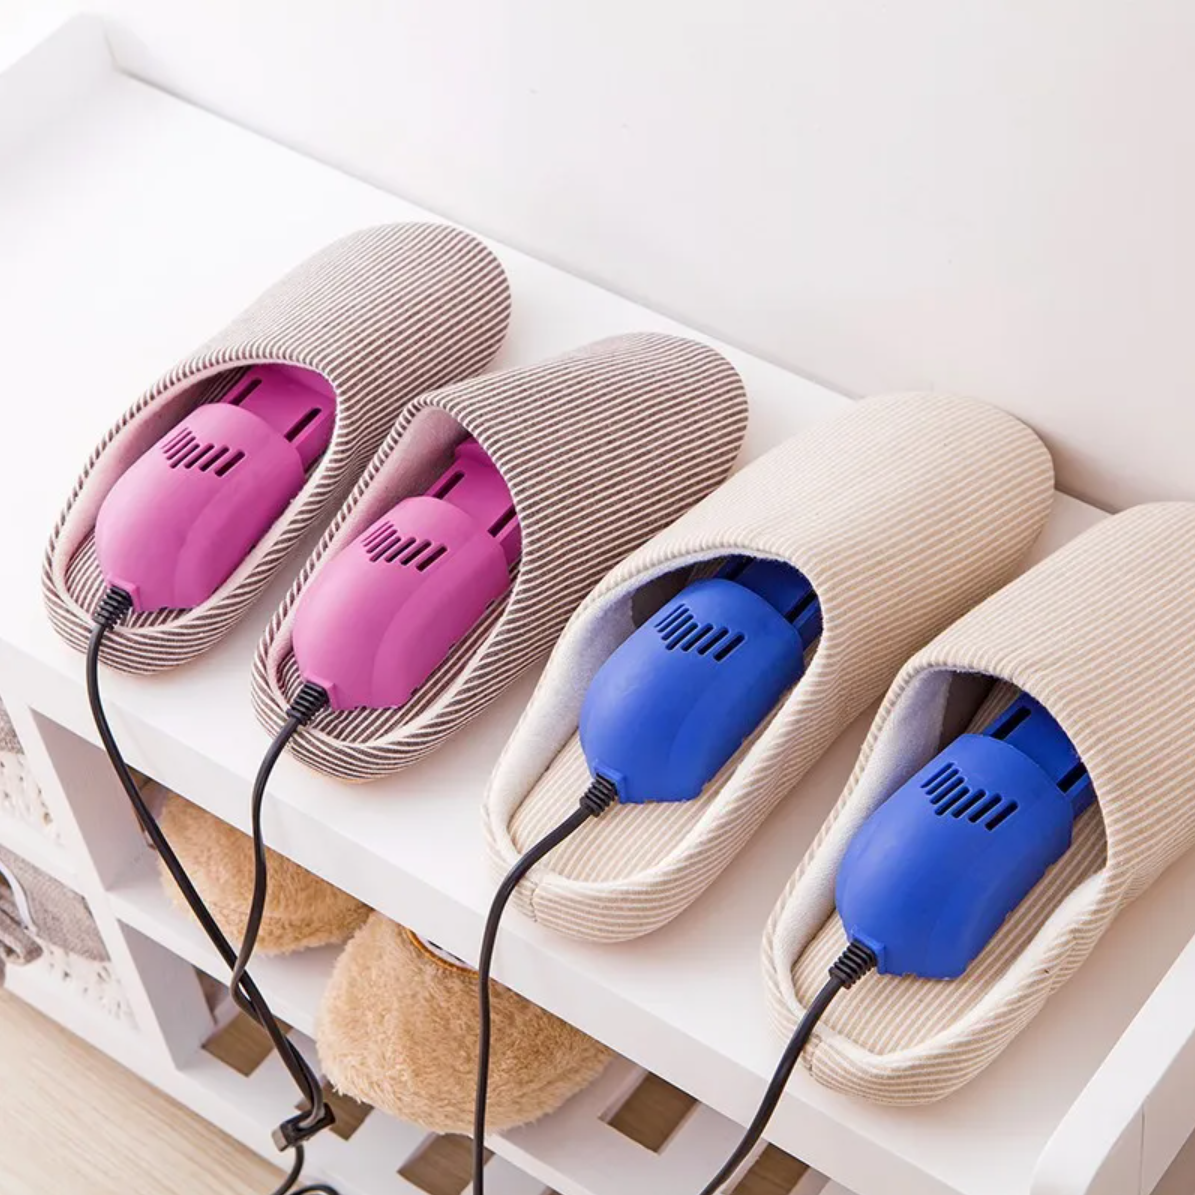 shoes and insoles dryer